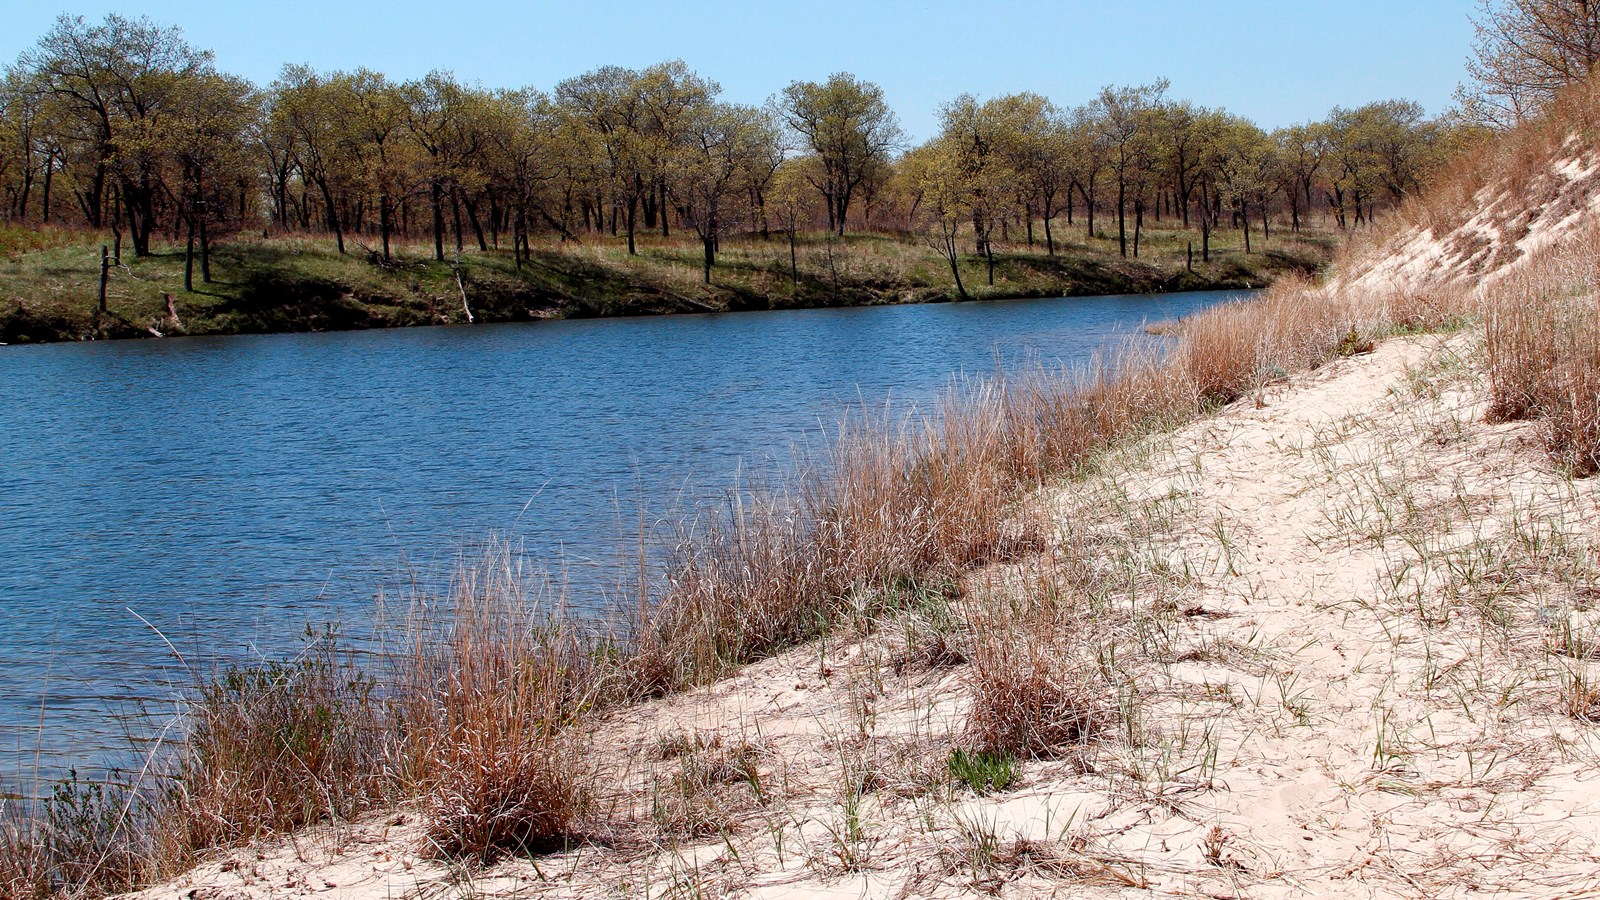 Sand dunes rise above the wetland ponds in the oak savannas of Miller Woods